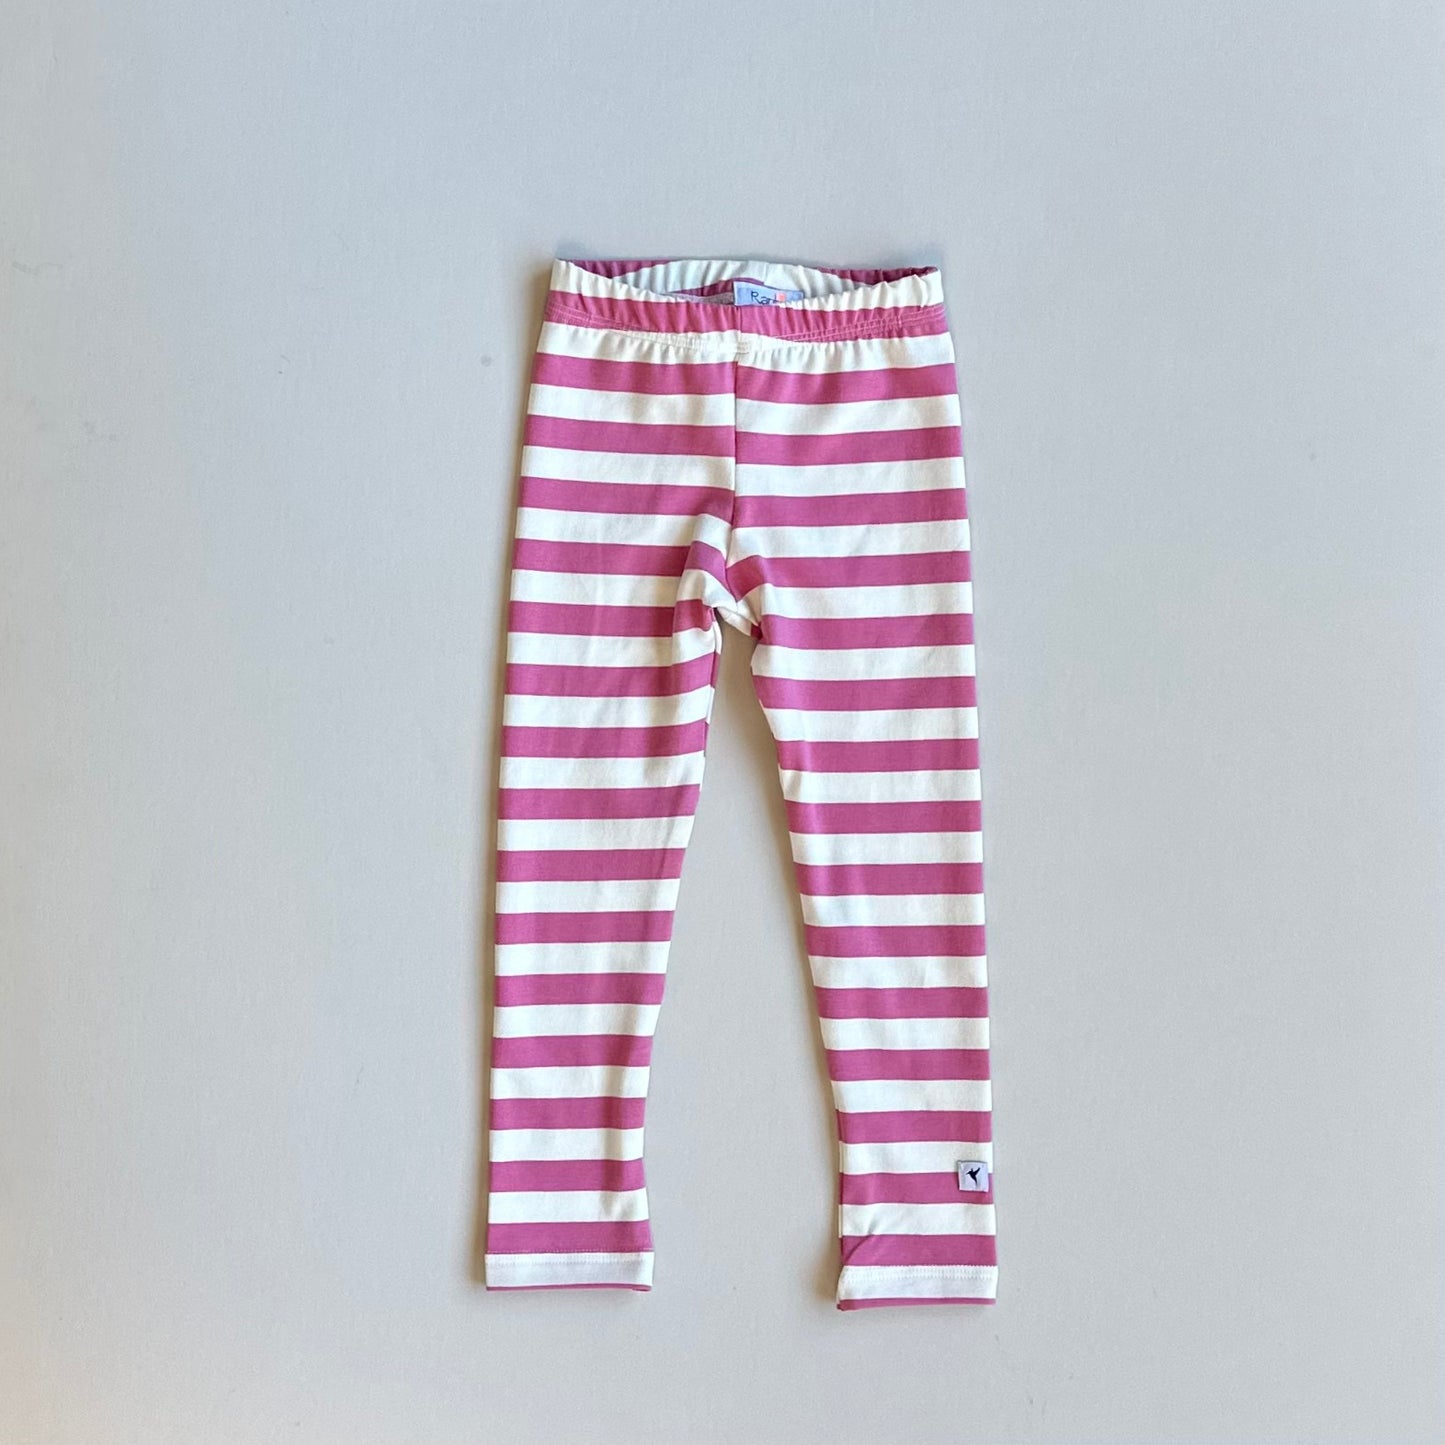 Leggings Handmade in Victoria, BC, Canada for Kids in Eco-Friendly Fabric, Pink Stripe